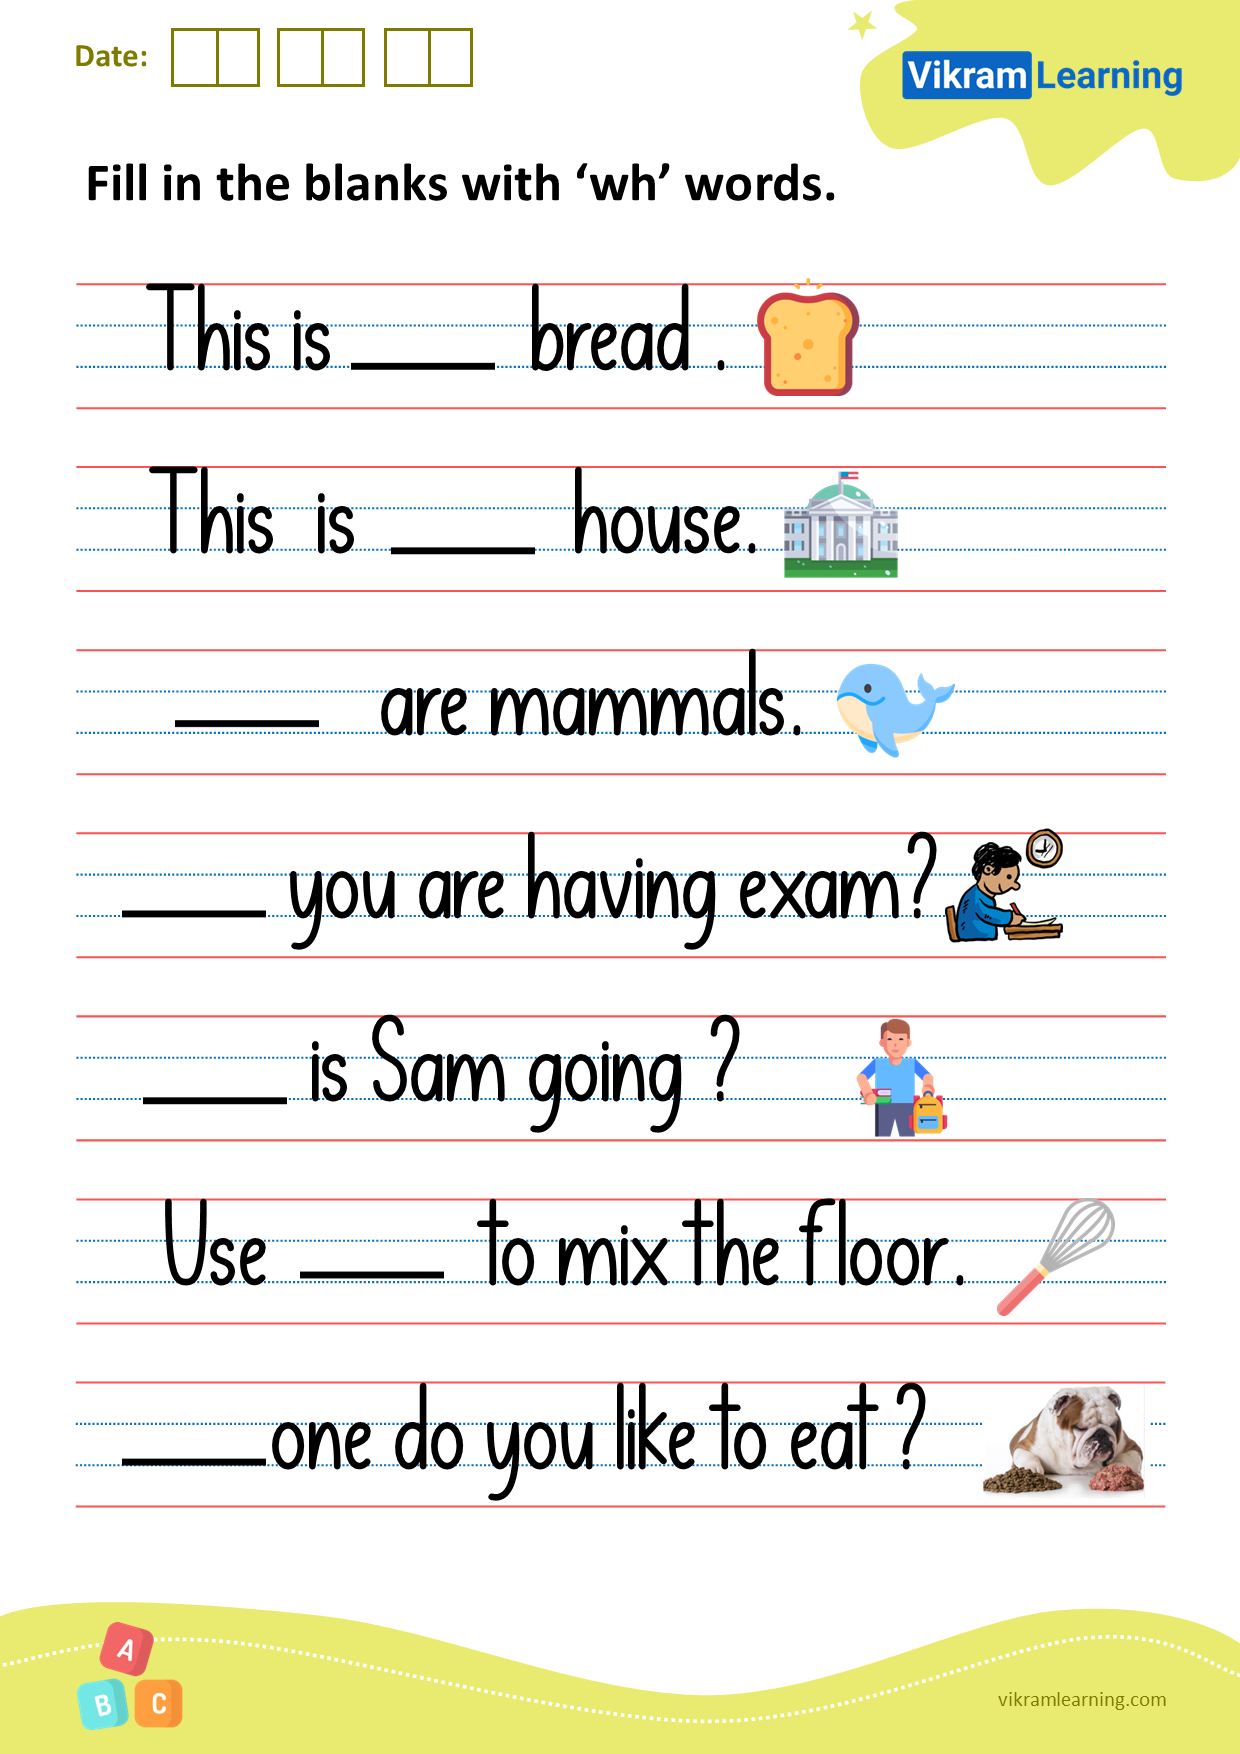 Download fill in the blanks with ‘wh’ words worksheets